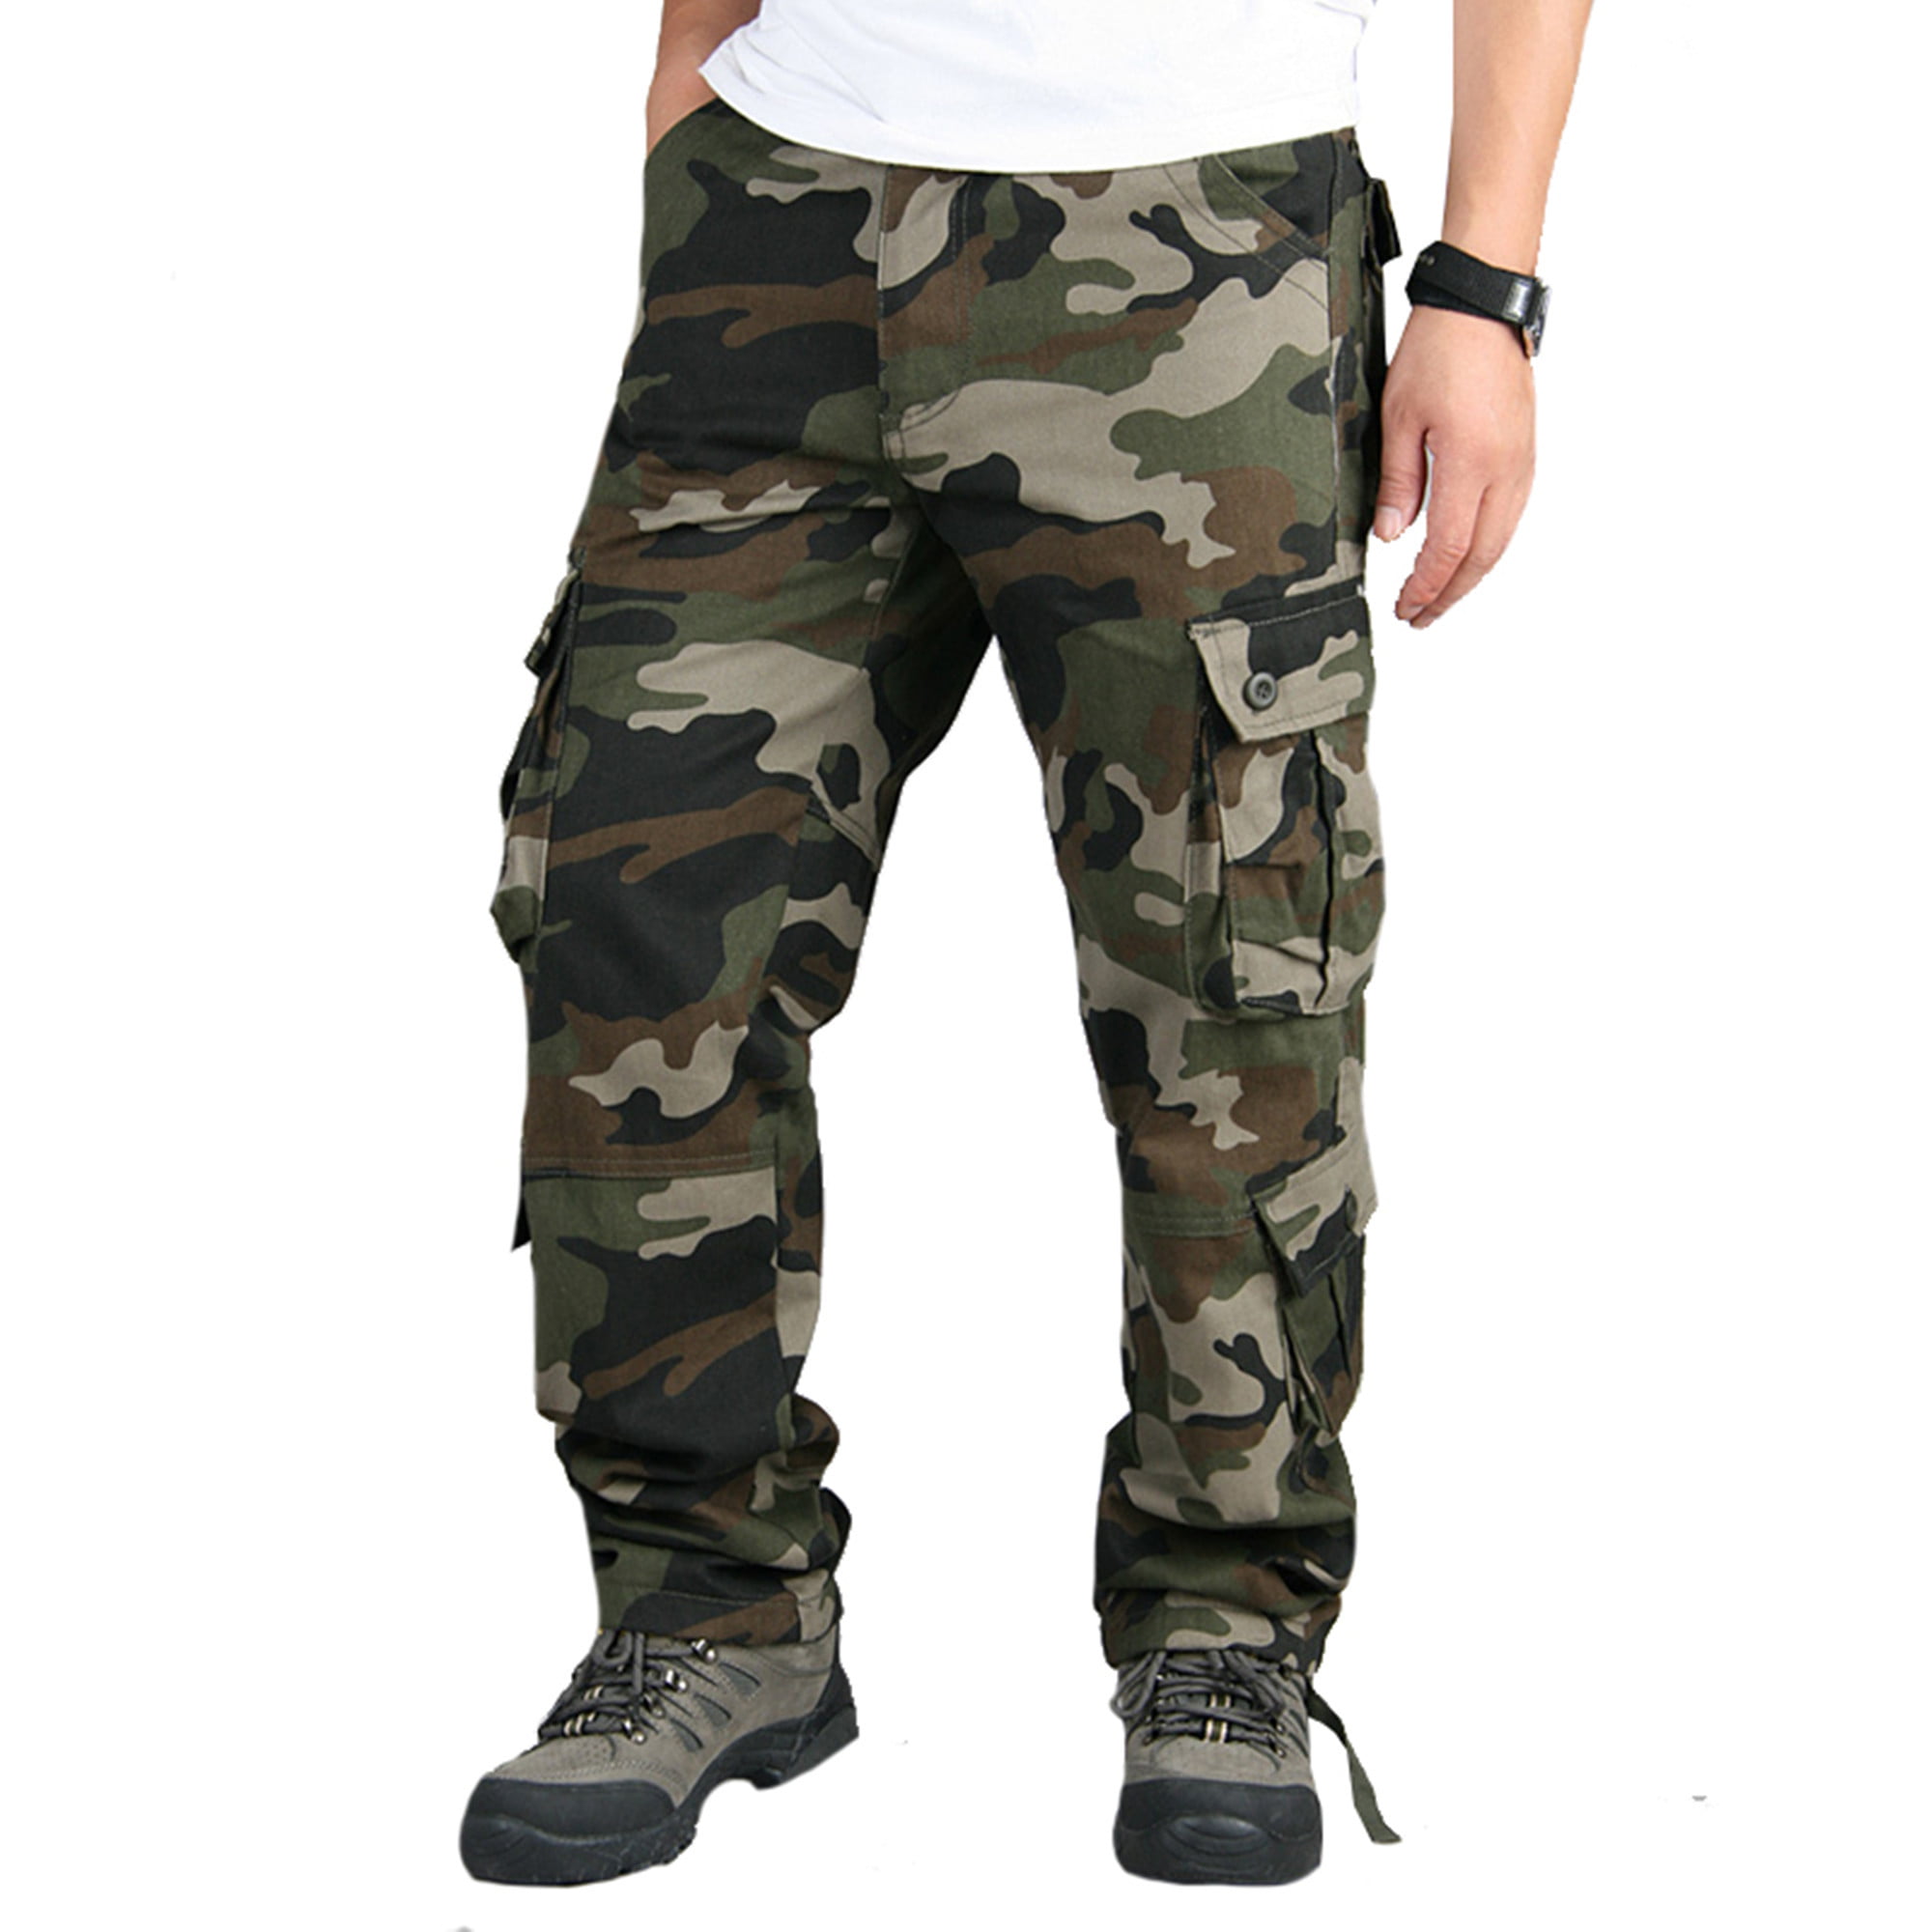 Details about   Army Combat Uniform Pants Digital Camouflage Unisex Size Extra Small Regular 